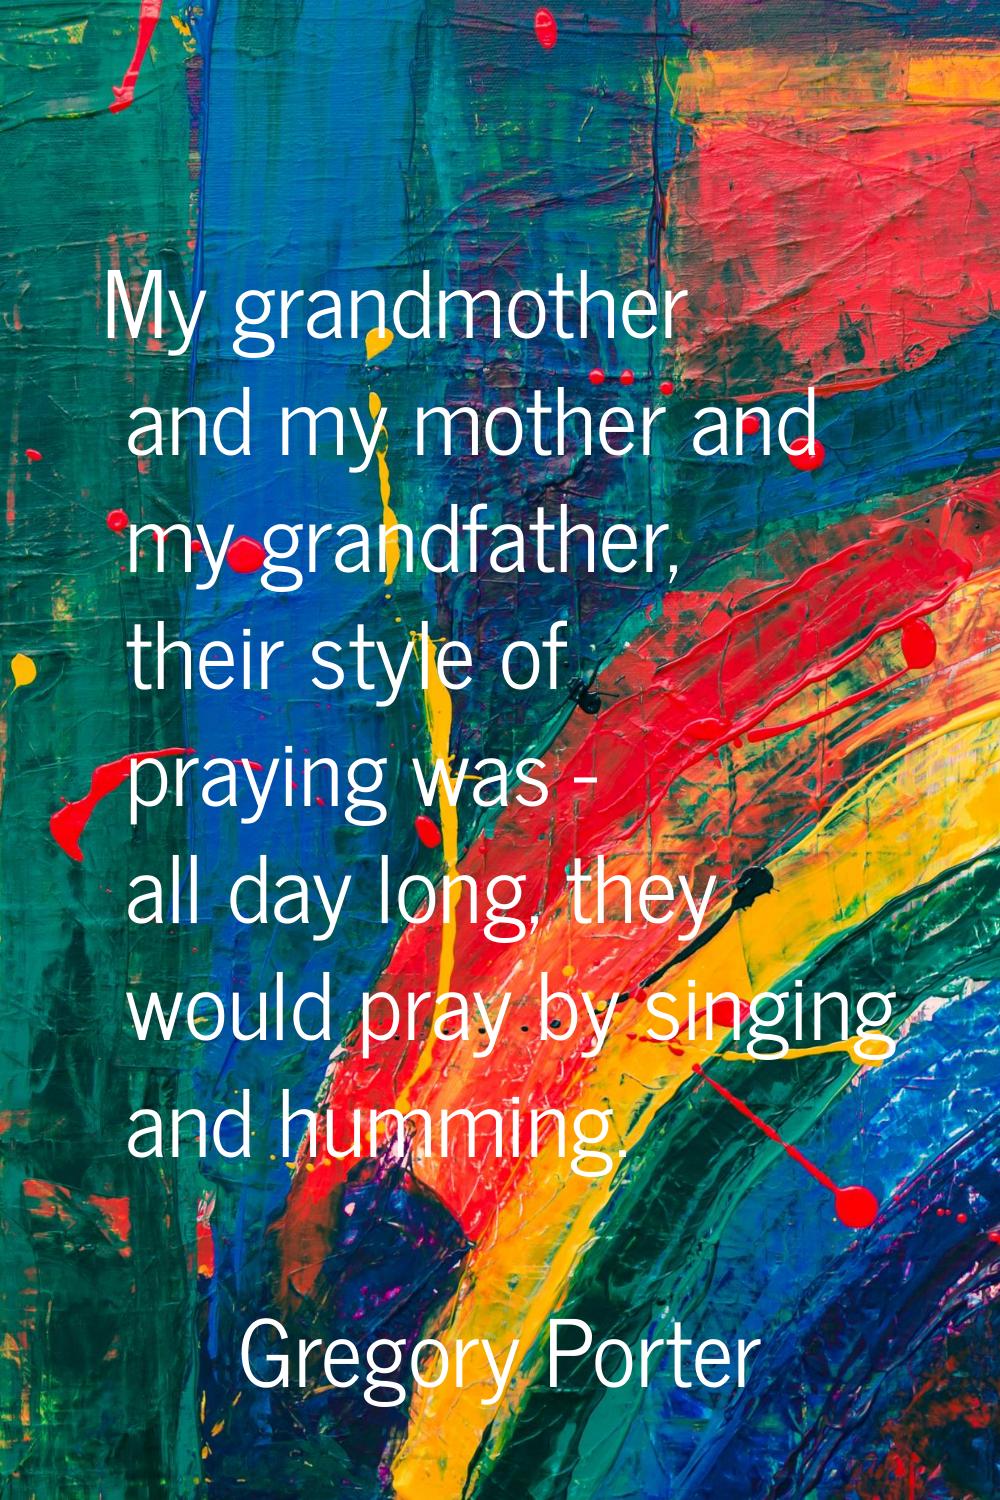 My grandmother and my mother and my grandfather, their style of praying was - all day long, they wo